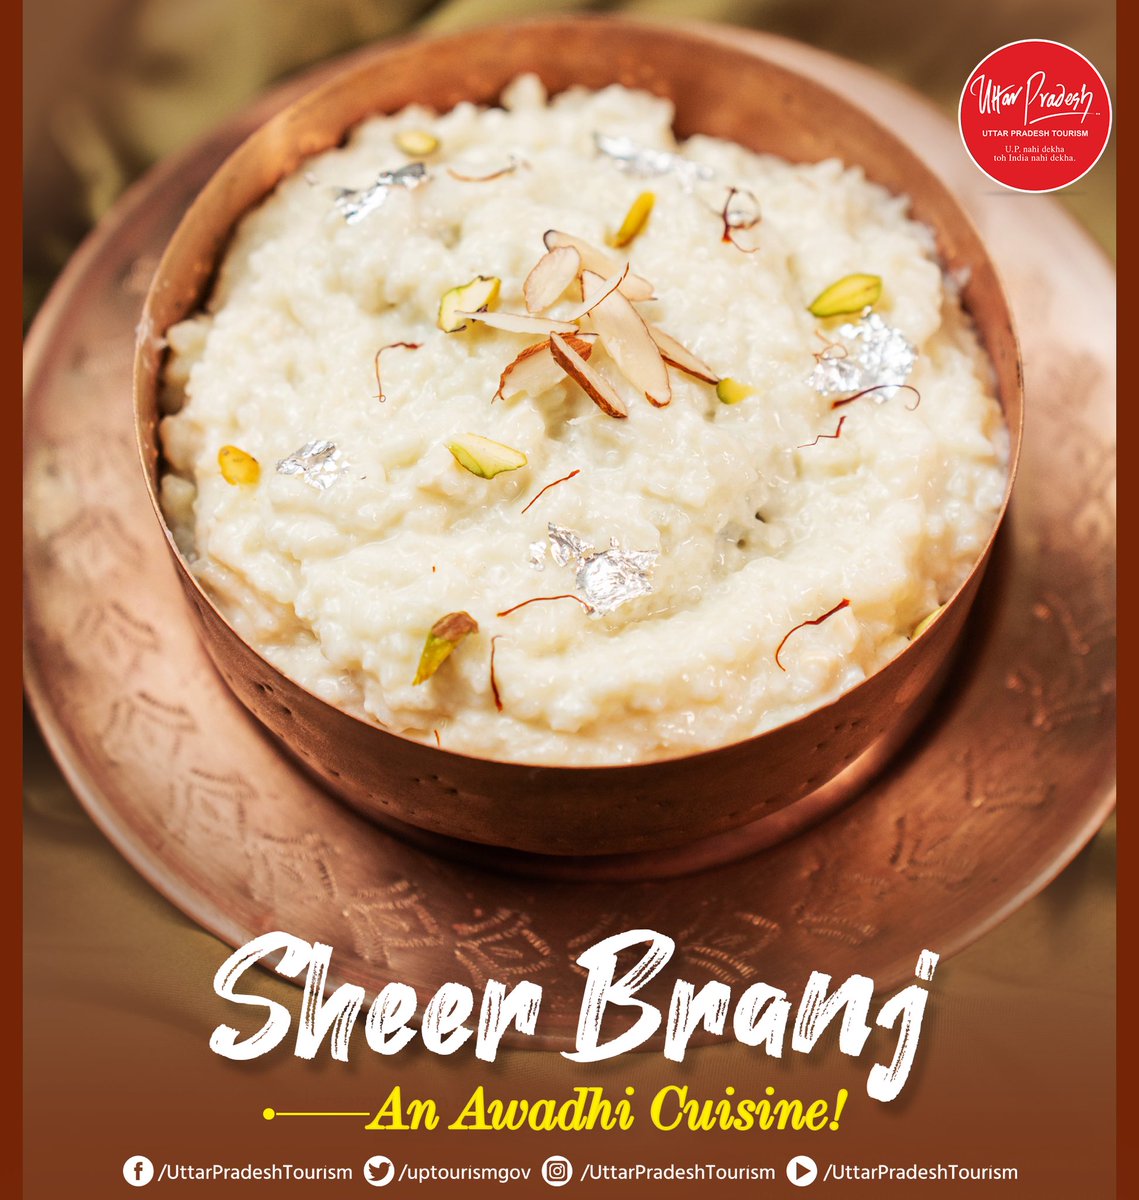 Sheer delight with #SheerBranj!
Indulge in love with the decadent #SheerBranjDessert!
Crafted from a luscious blend of rice, creamy milk, and a medley of nuts, it's the perfect fusion of richness and flavour. Whether warm or chilled, it's a heavenly treat fit for any celebration!